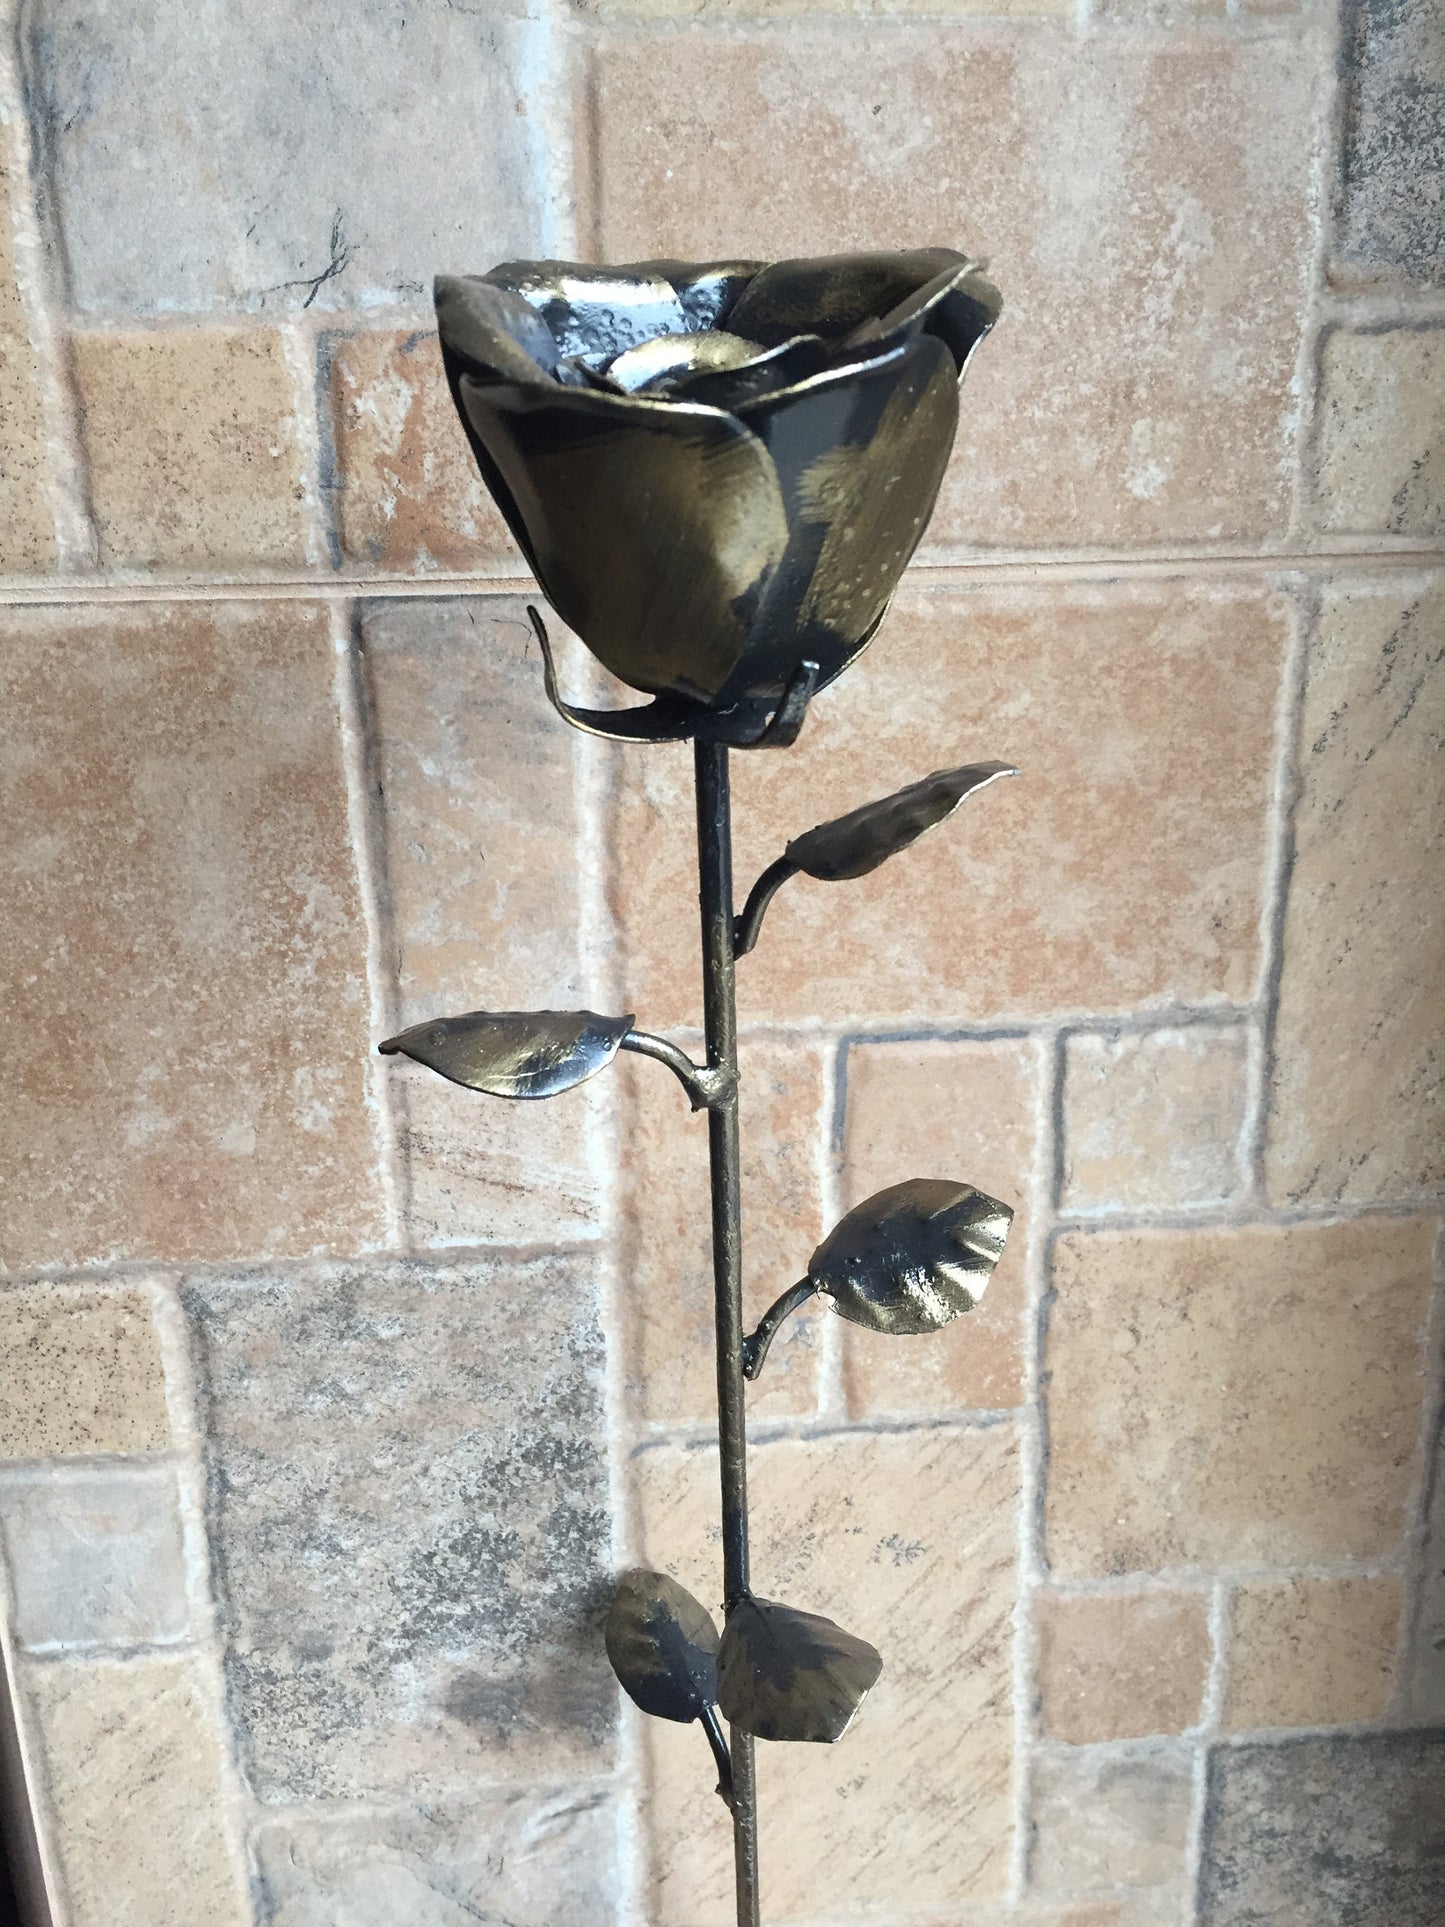 Iron rose, steel rose, metal rose, forged flower, metal bouquet, iron gifts, iron anniversary gift for her, steel anniversary gift, forged